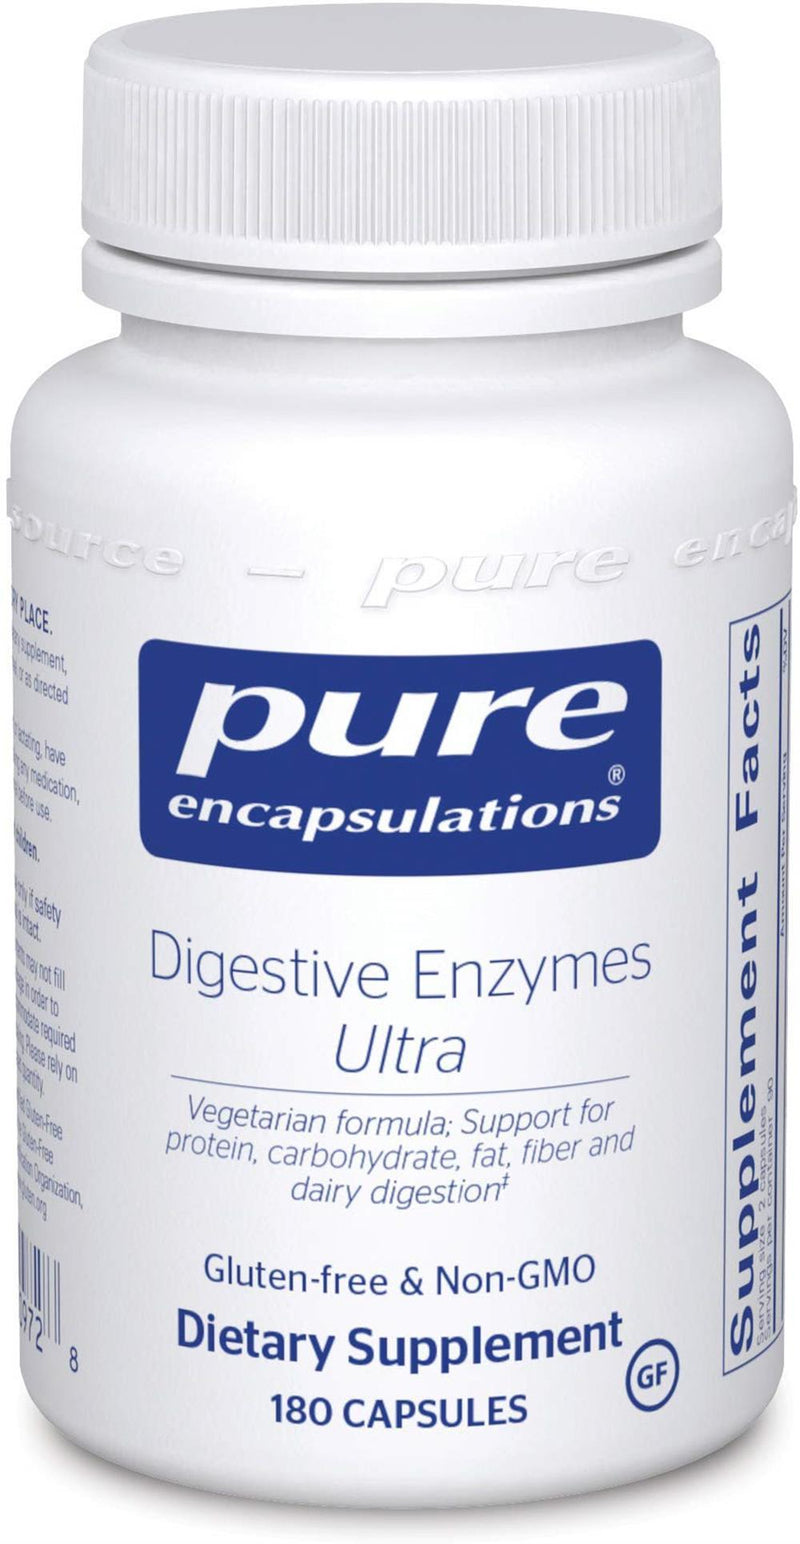 Pure Encapsulations Digestive Enzymes Ultra -- 90 Capsules 180 capsules